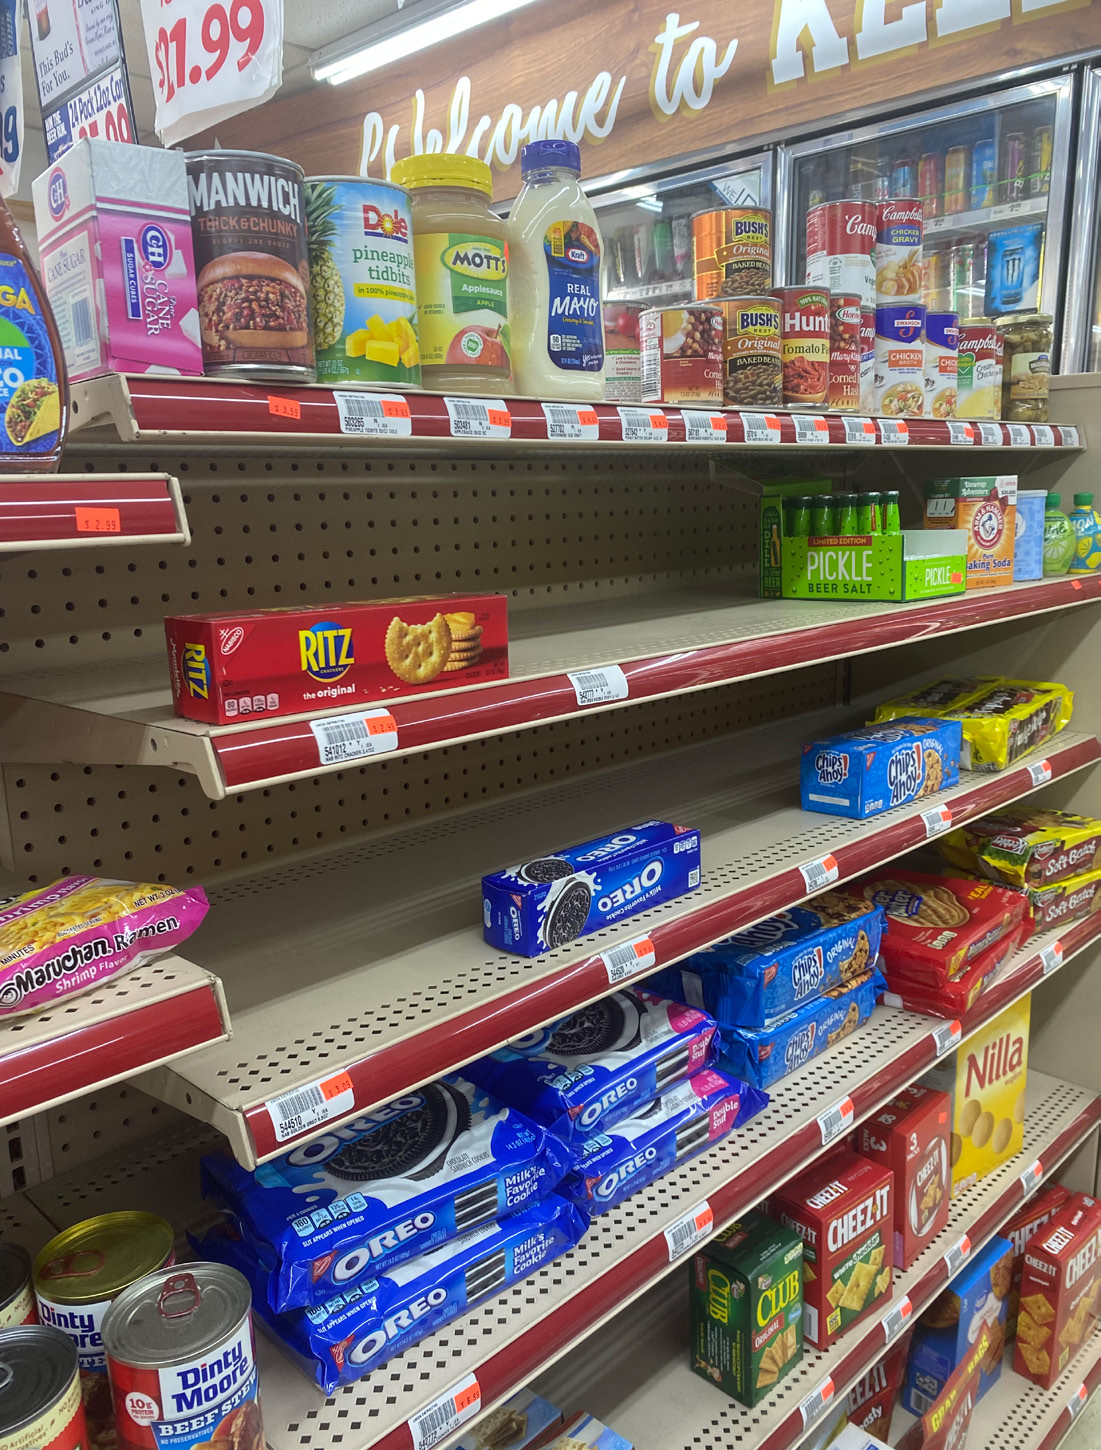 Food choices inside the Kellogg Country Store mostly consist of prepackaged food items with limited nutritional value. Image courtesy of the author